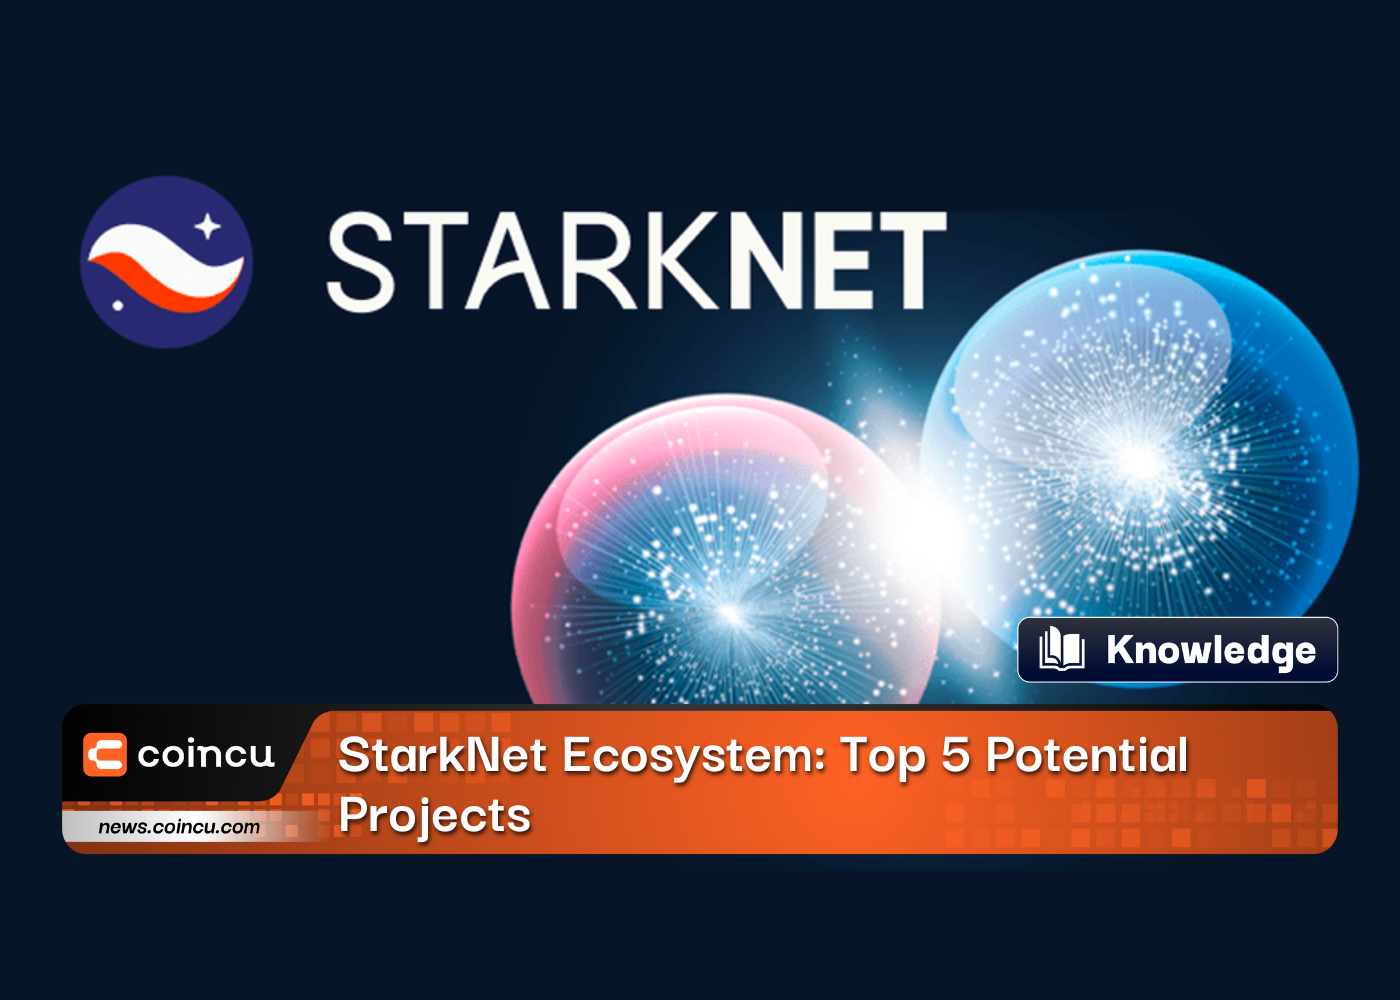 StarkNet Ecosystem: Top 5 Potential Projects